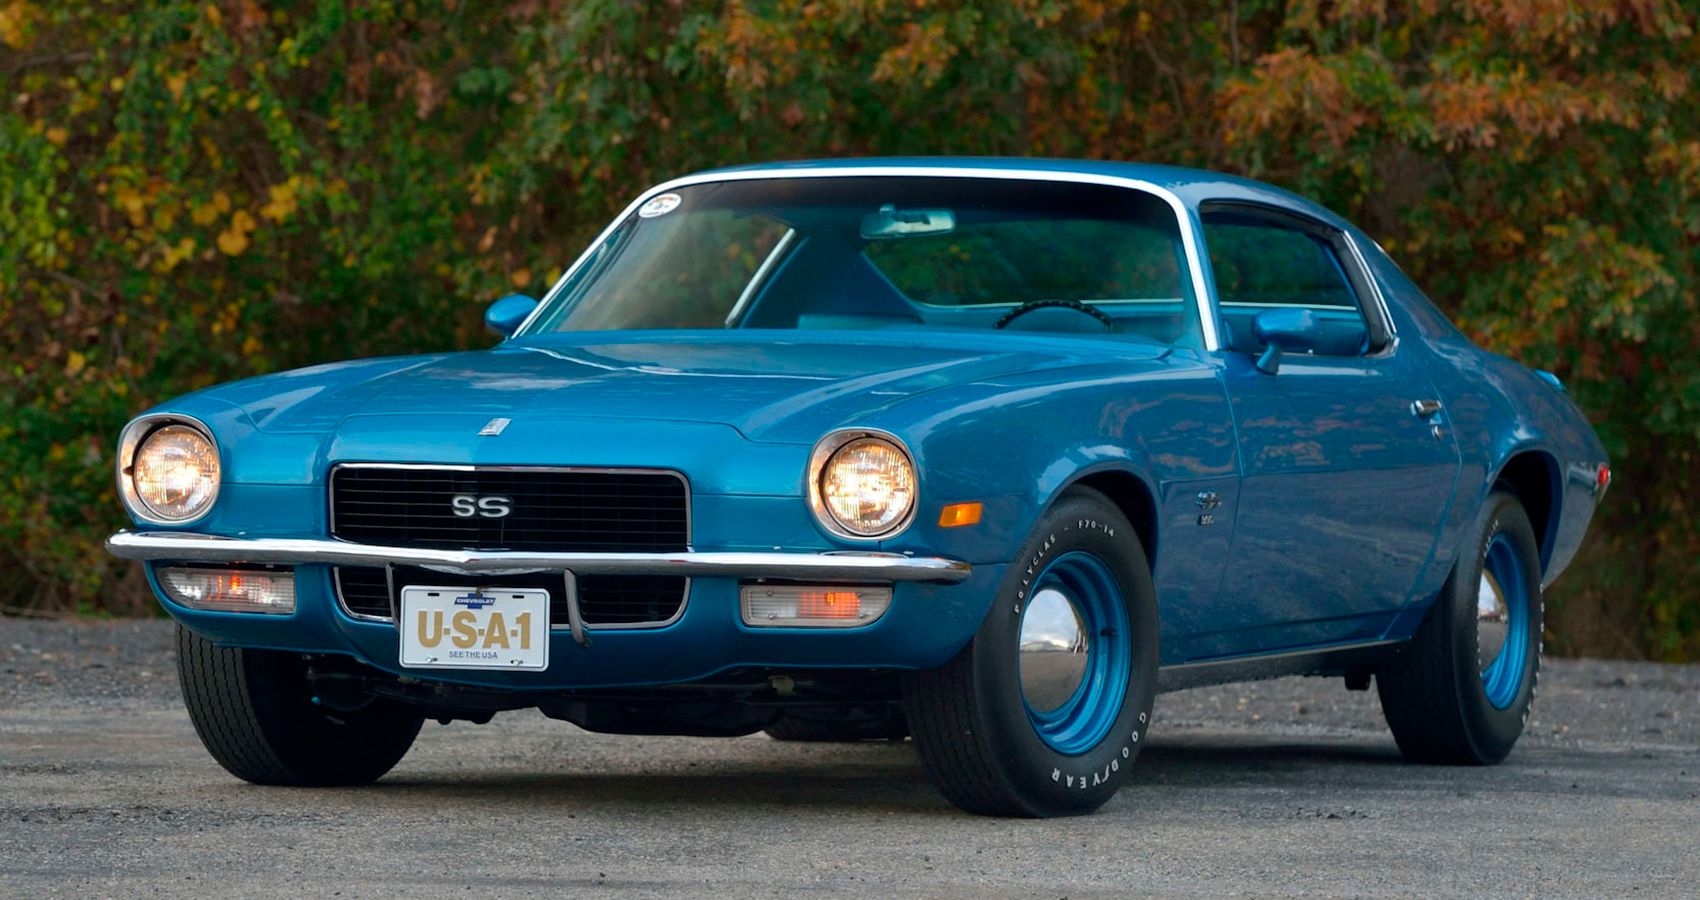 This Is What Made The 1970 Chevrolet Camaro SS So Special